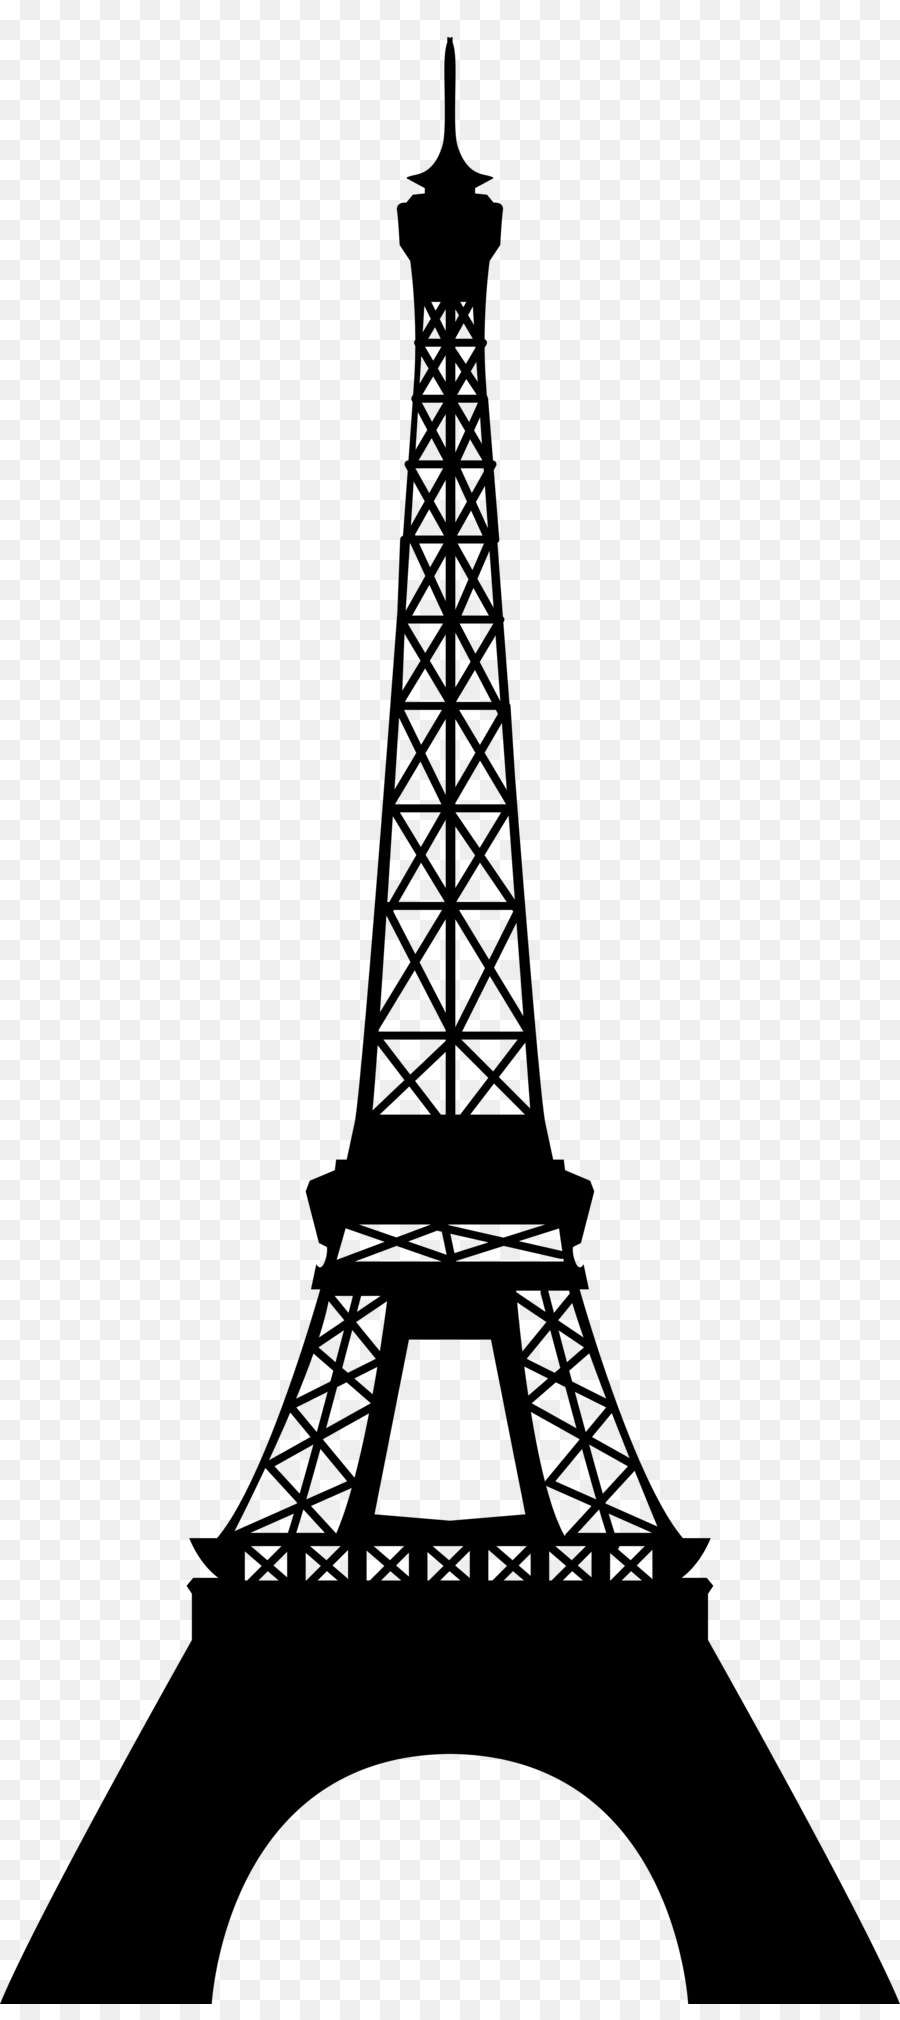 Eiffel Tower Clip art Silhouette Portable Network Graphics Image - eiffel tower clipart png drawing png download - 3593*8000 - Free Transparent Eiffel Tower png Download.